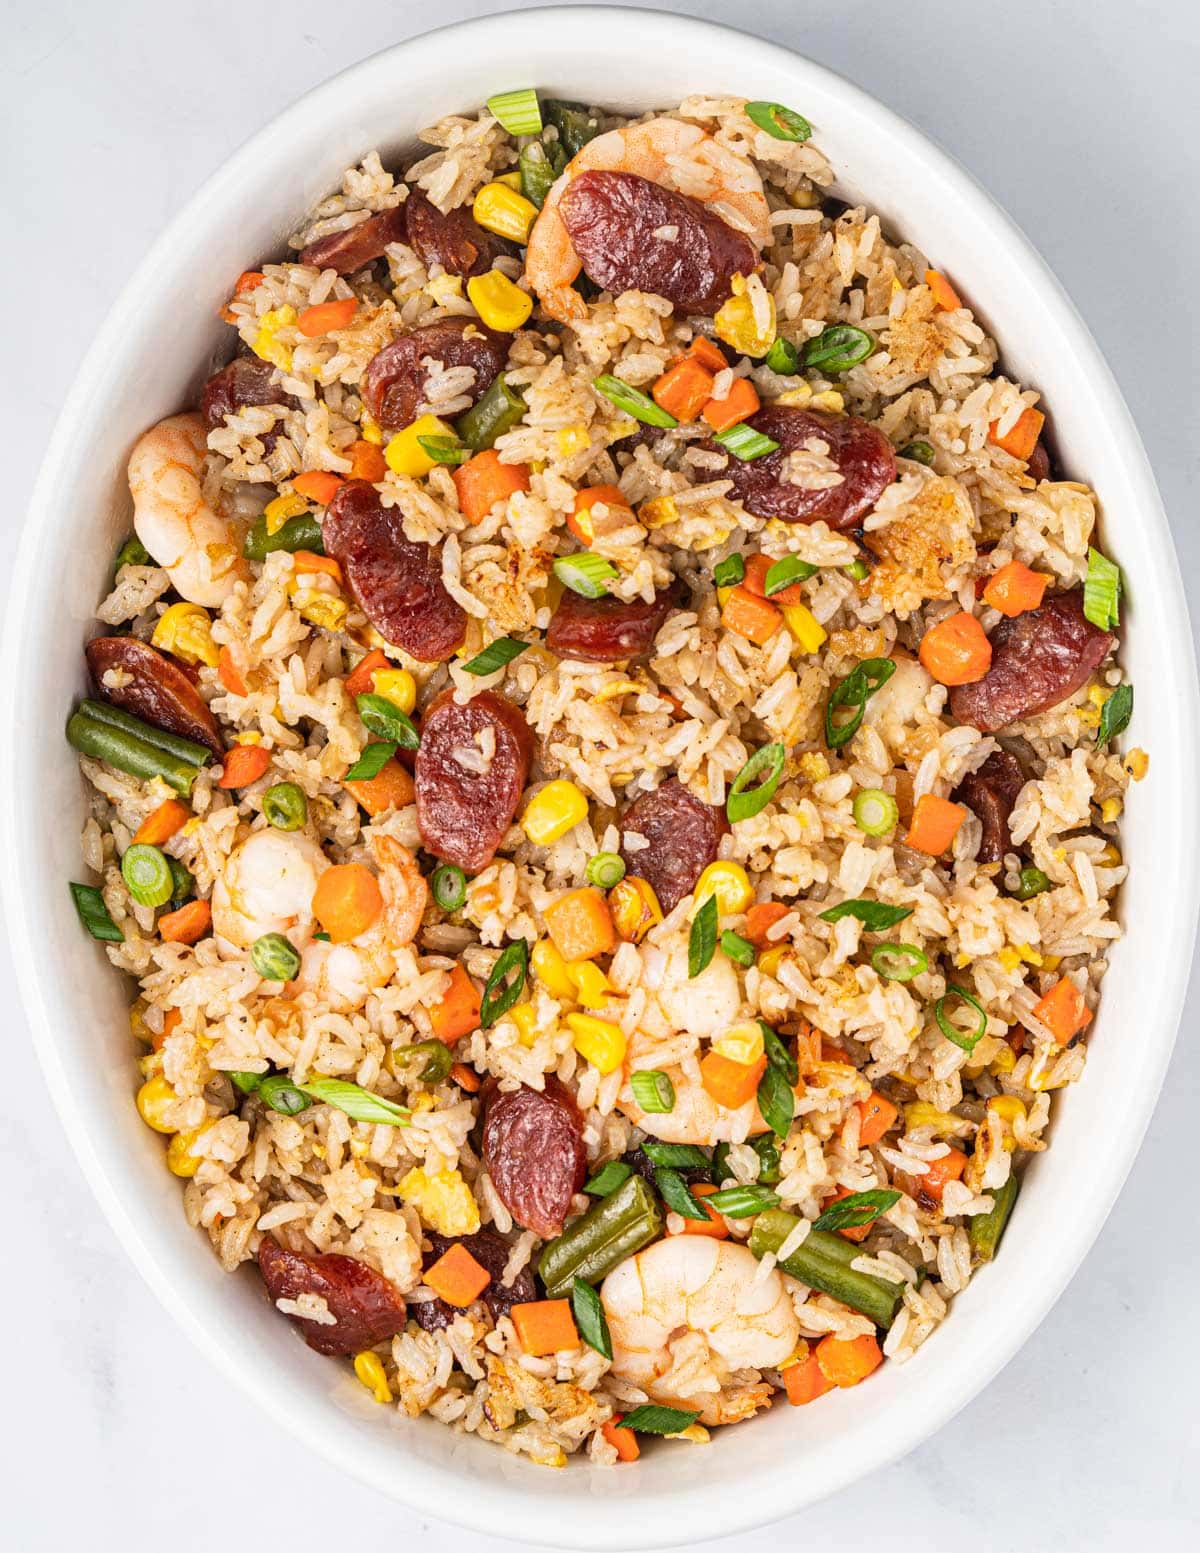 Serving bowl of Vietnamese Fried Rice with Chinese sausages, shrimp, and vegetables.